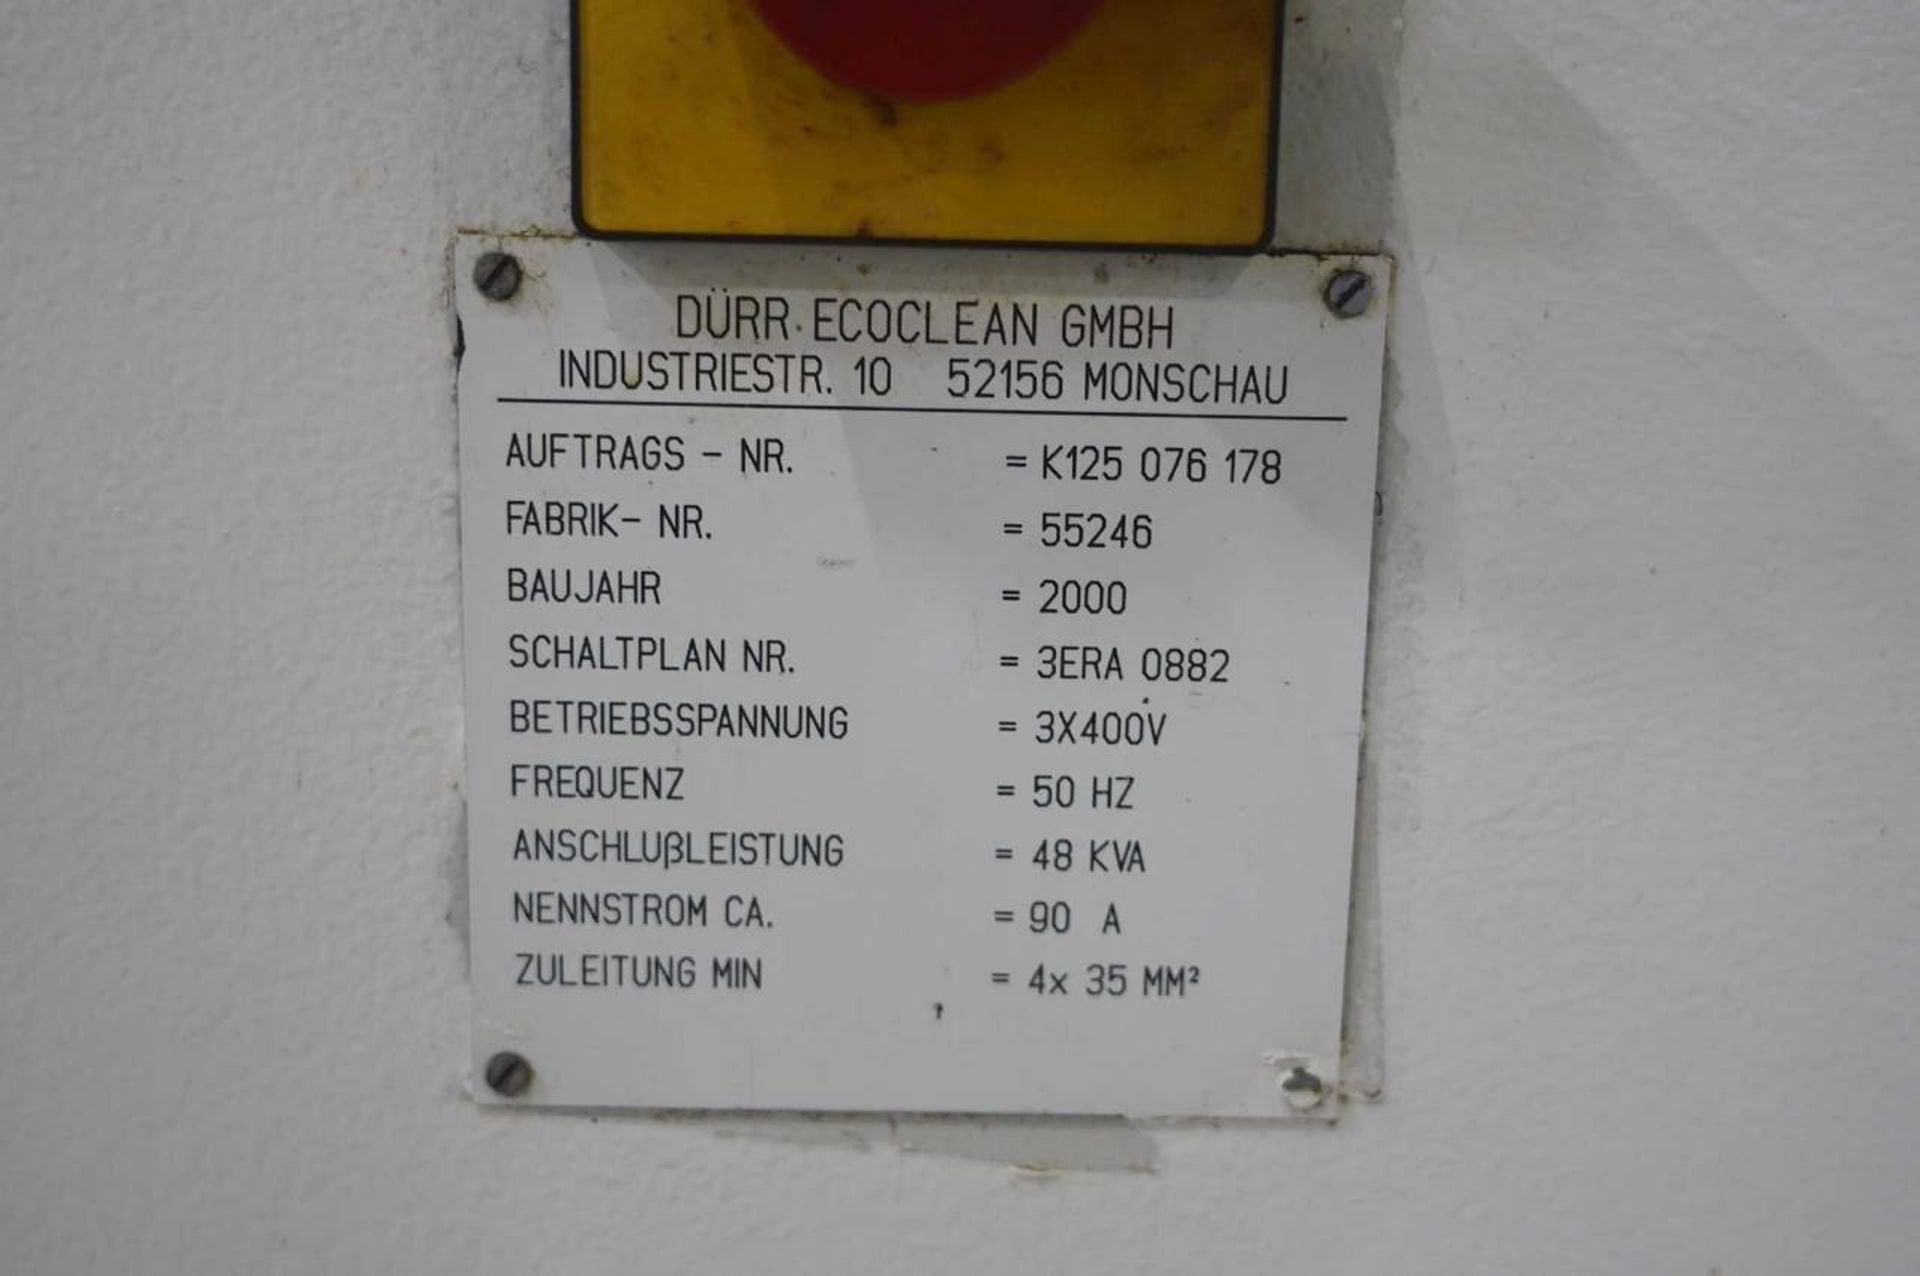 2000 Durr Ecoclean GMBH Washer - Image 10 of 10